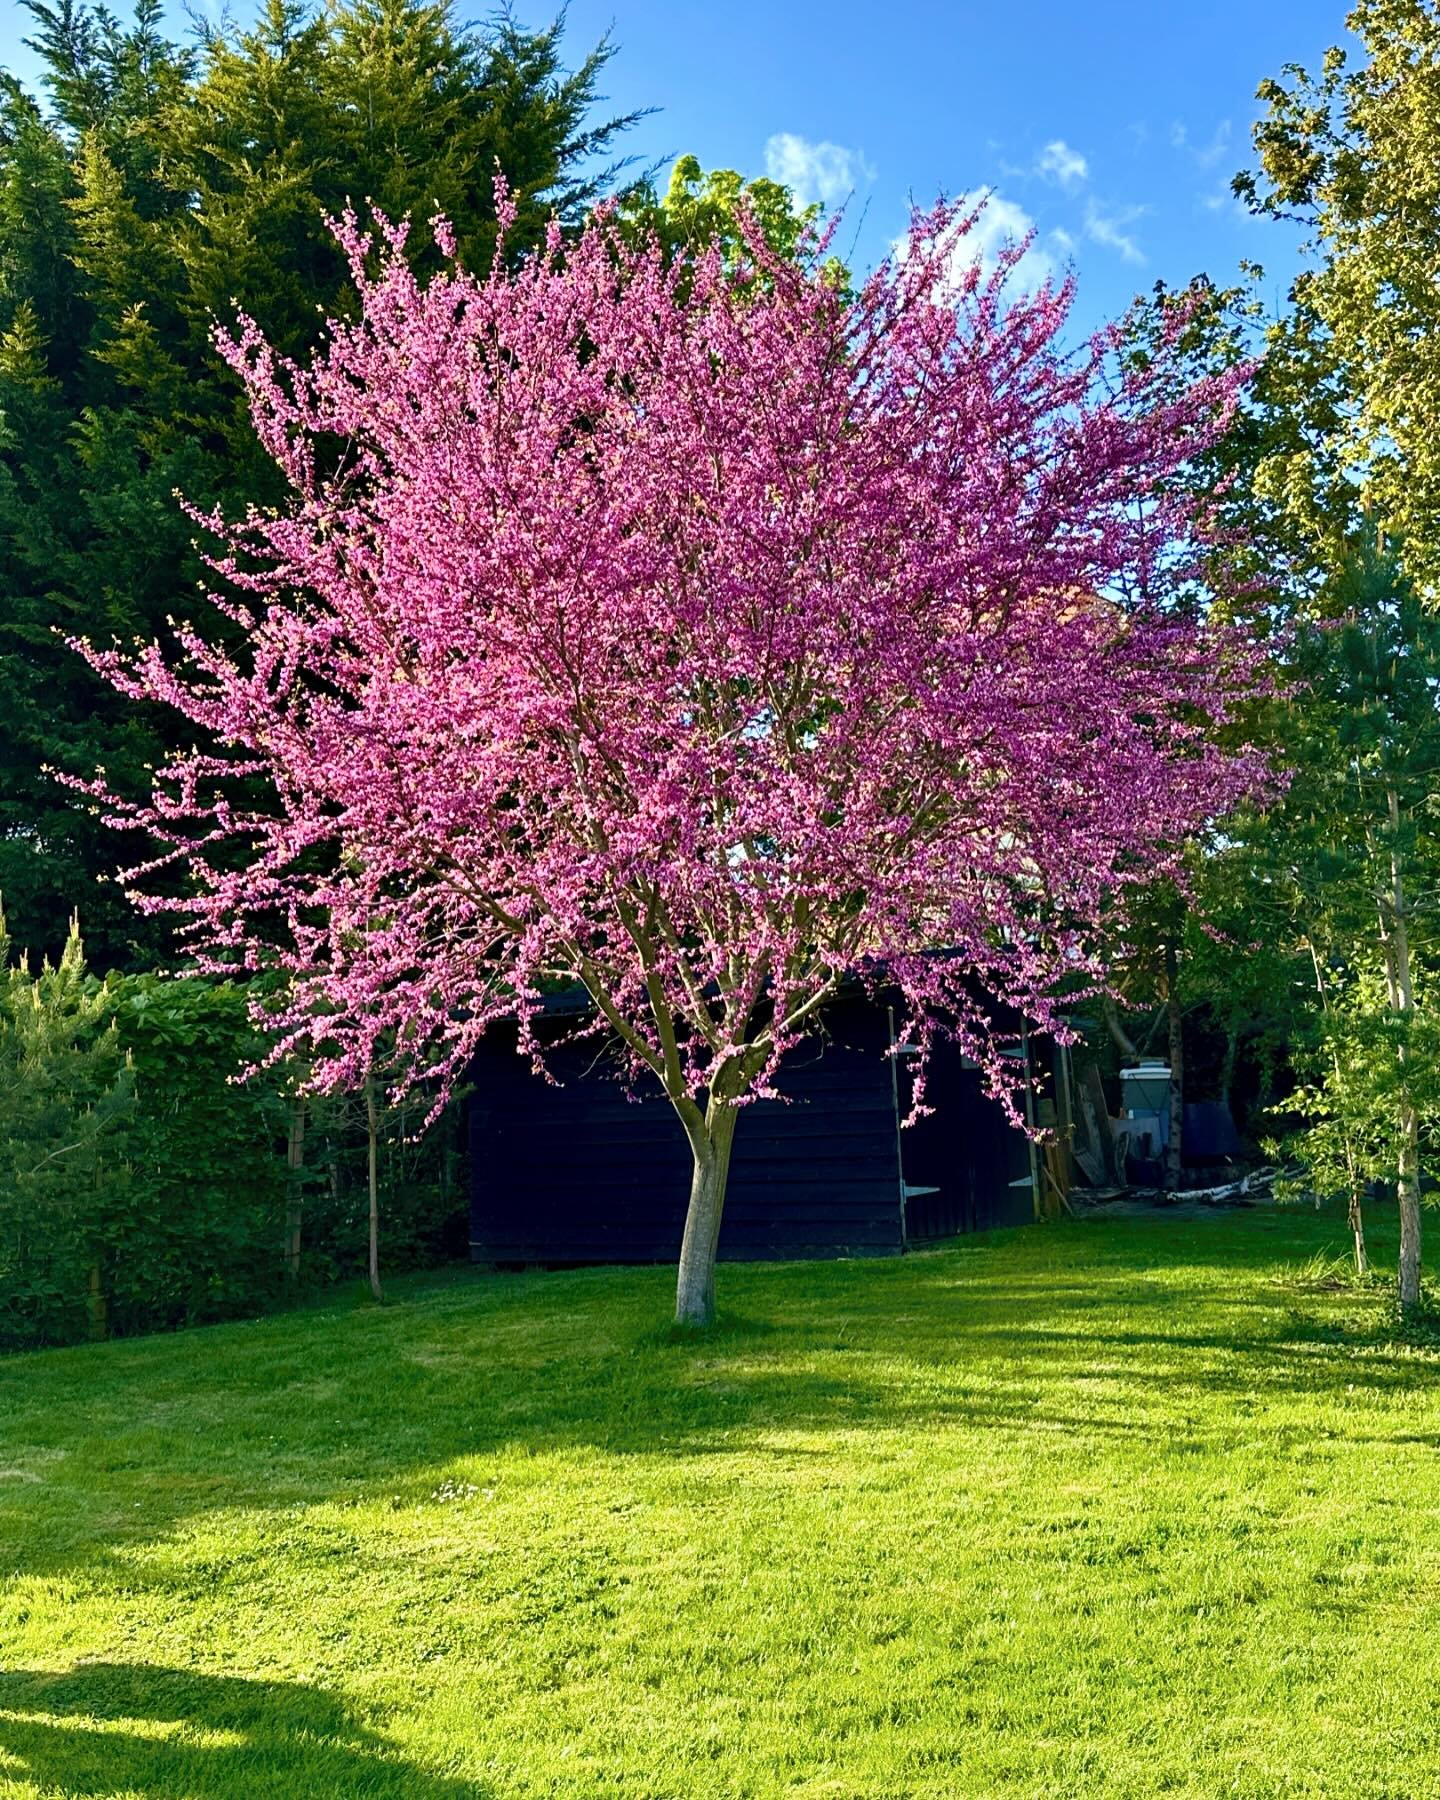 Cercis siliquastrum, Judas Tree - the only pink in my garden. I love this tree. I bought it from, what I call, the hospital wing of a local nursery for about &pound;3 twelve years ago (last pic). Yes, it required some patience but that makes the enjo